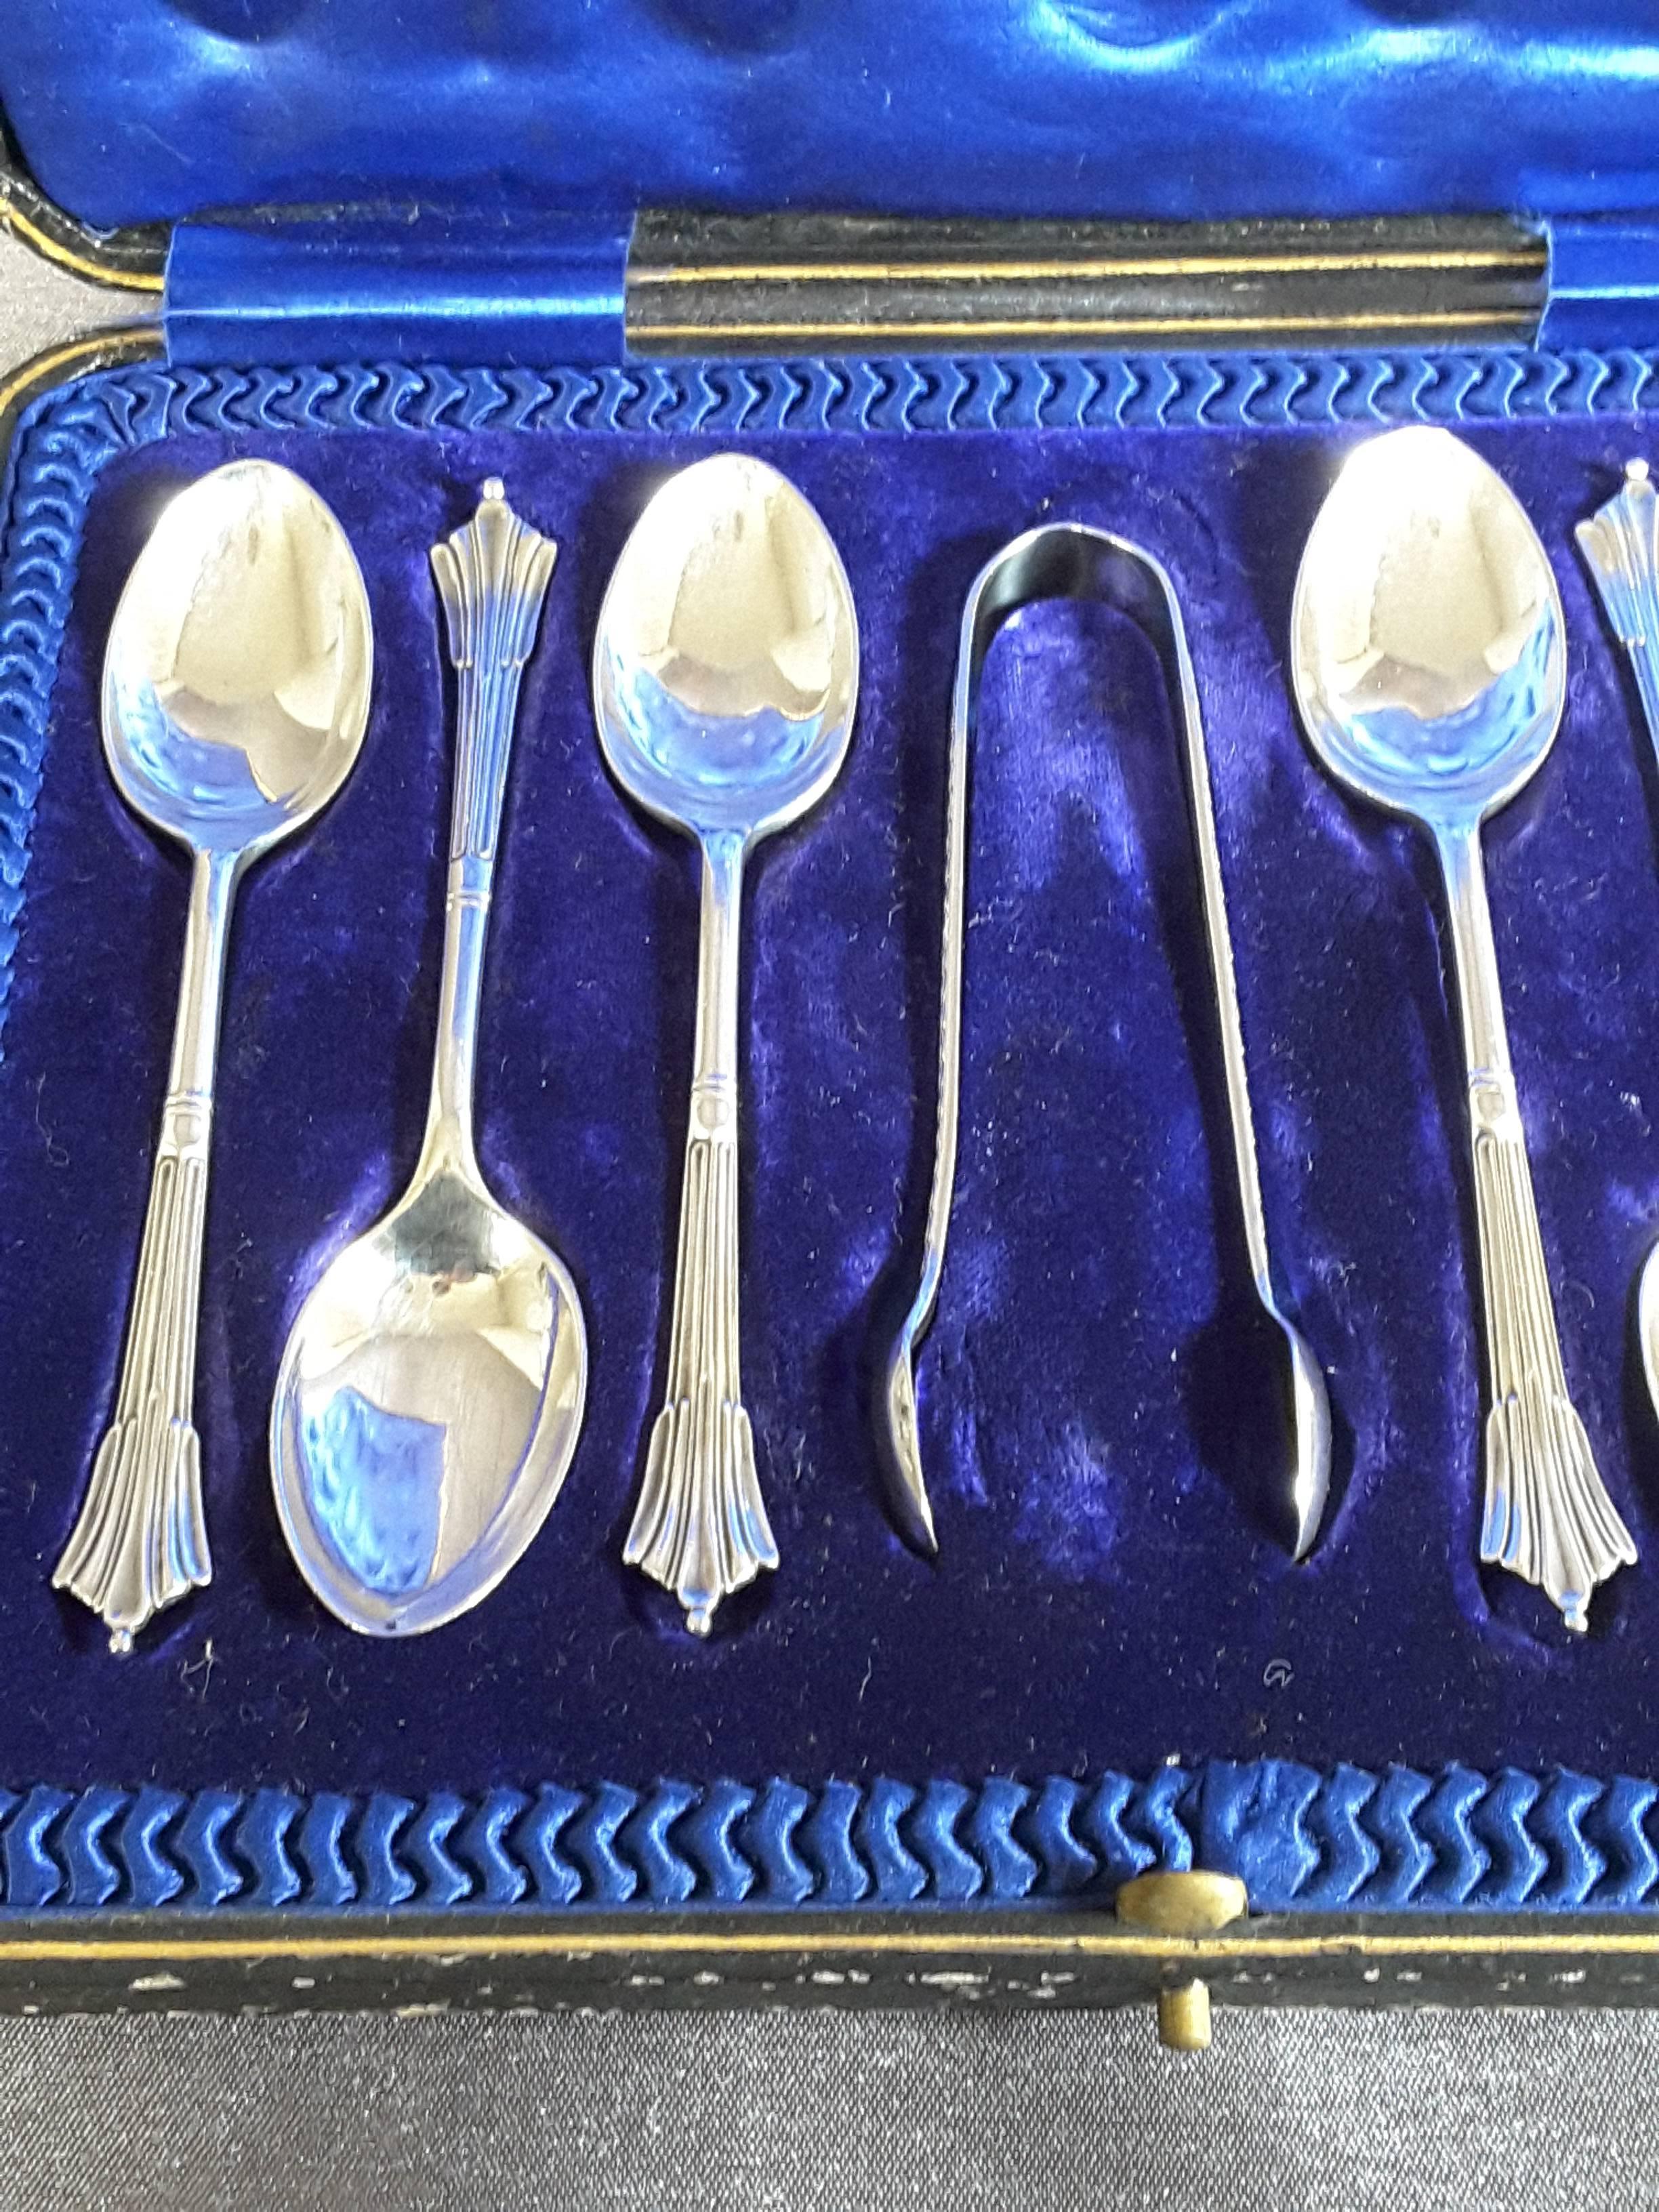 A boxed set of Demi-Tasse sterling silver spoons with a set of sugar tongs, the set consists of six demi-tasse spoons and one set of sugar tongs, Hallmarked on verso for London, 1912, Maker is Atkin Brothers. The spoons are 4 1/2